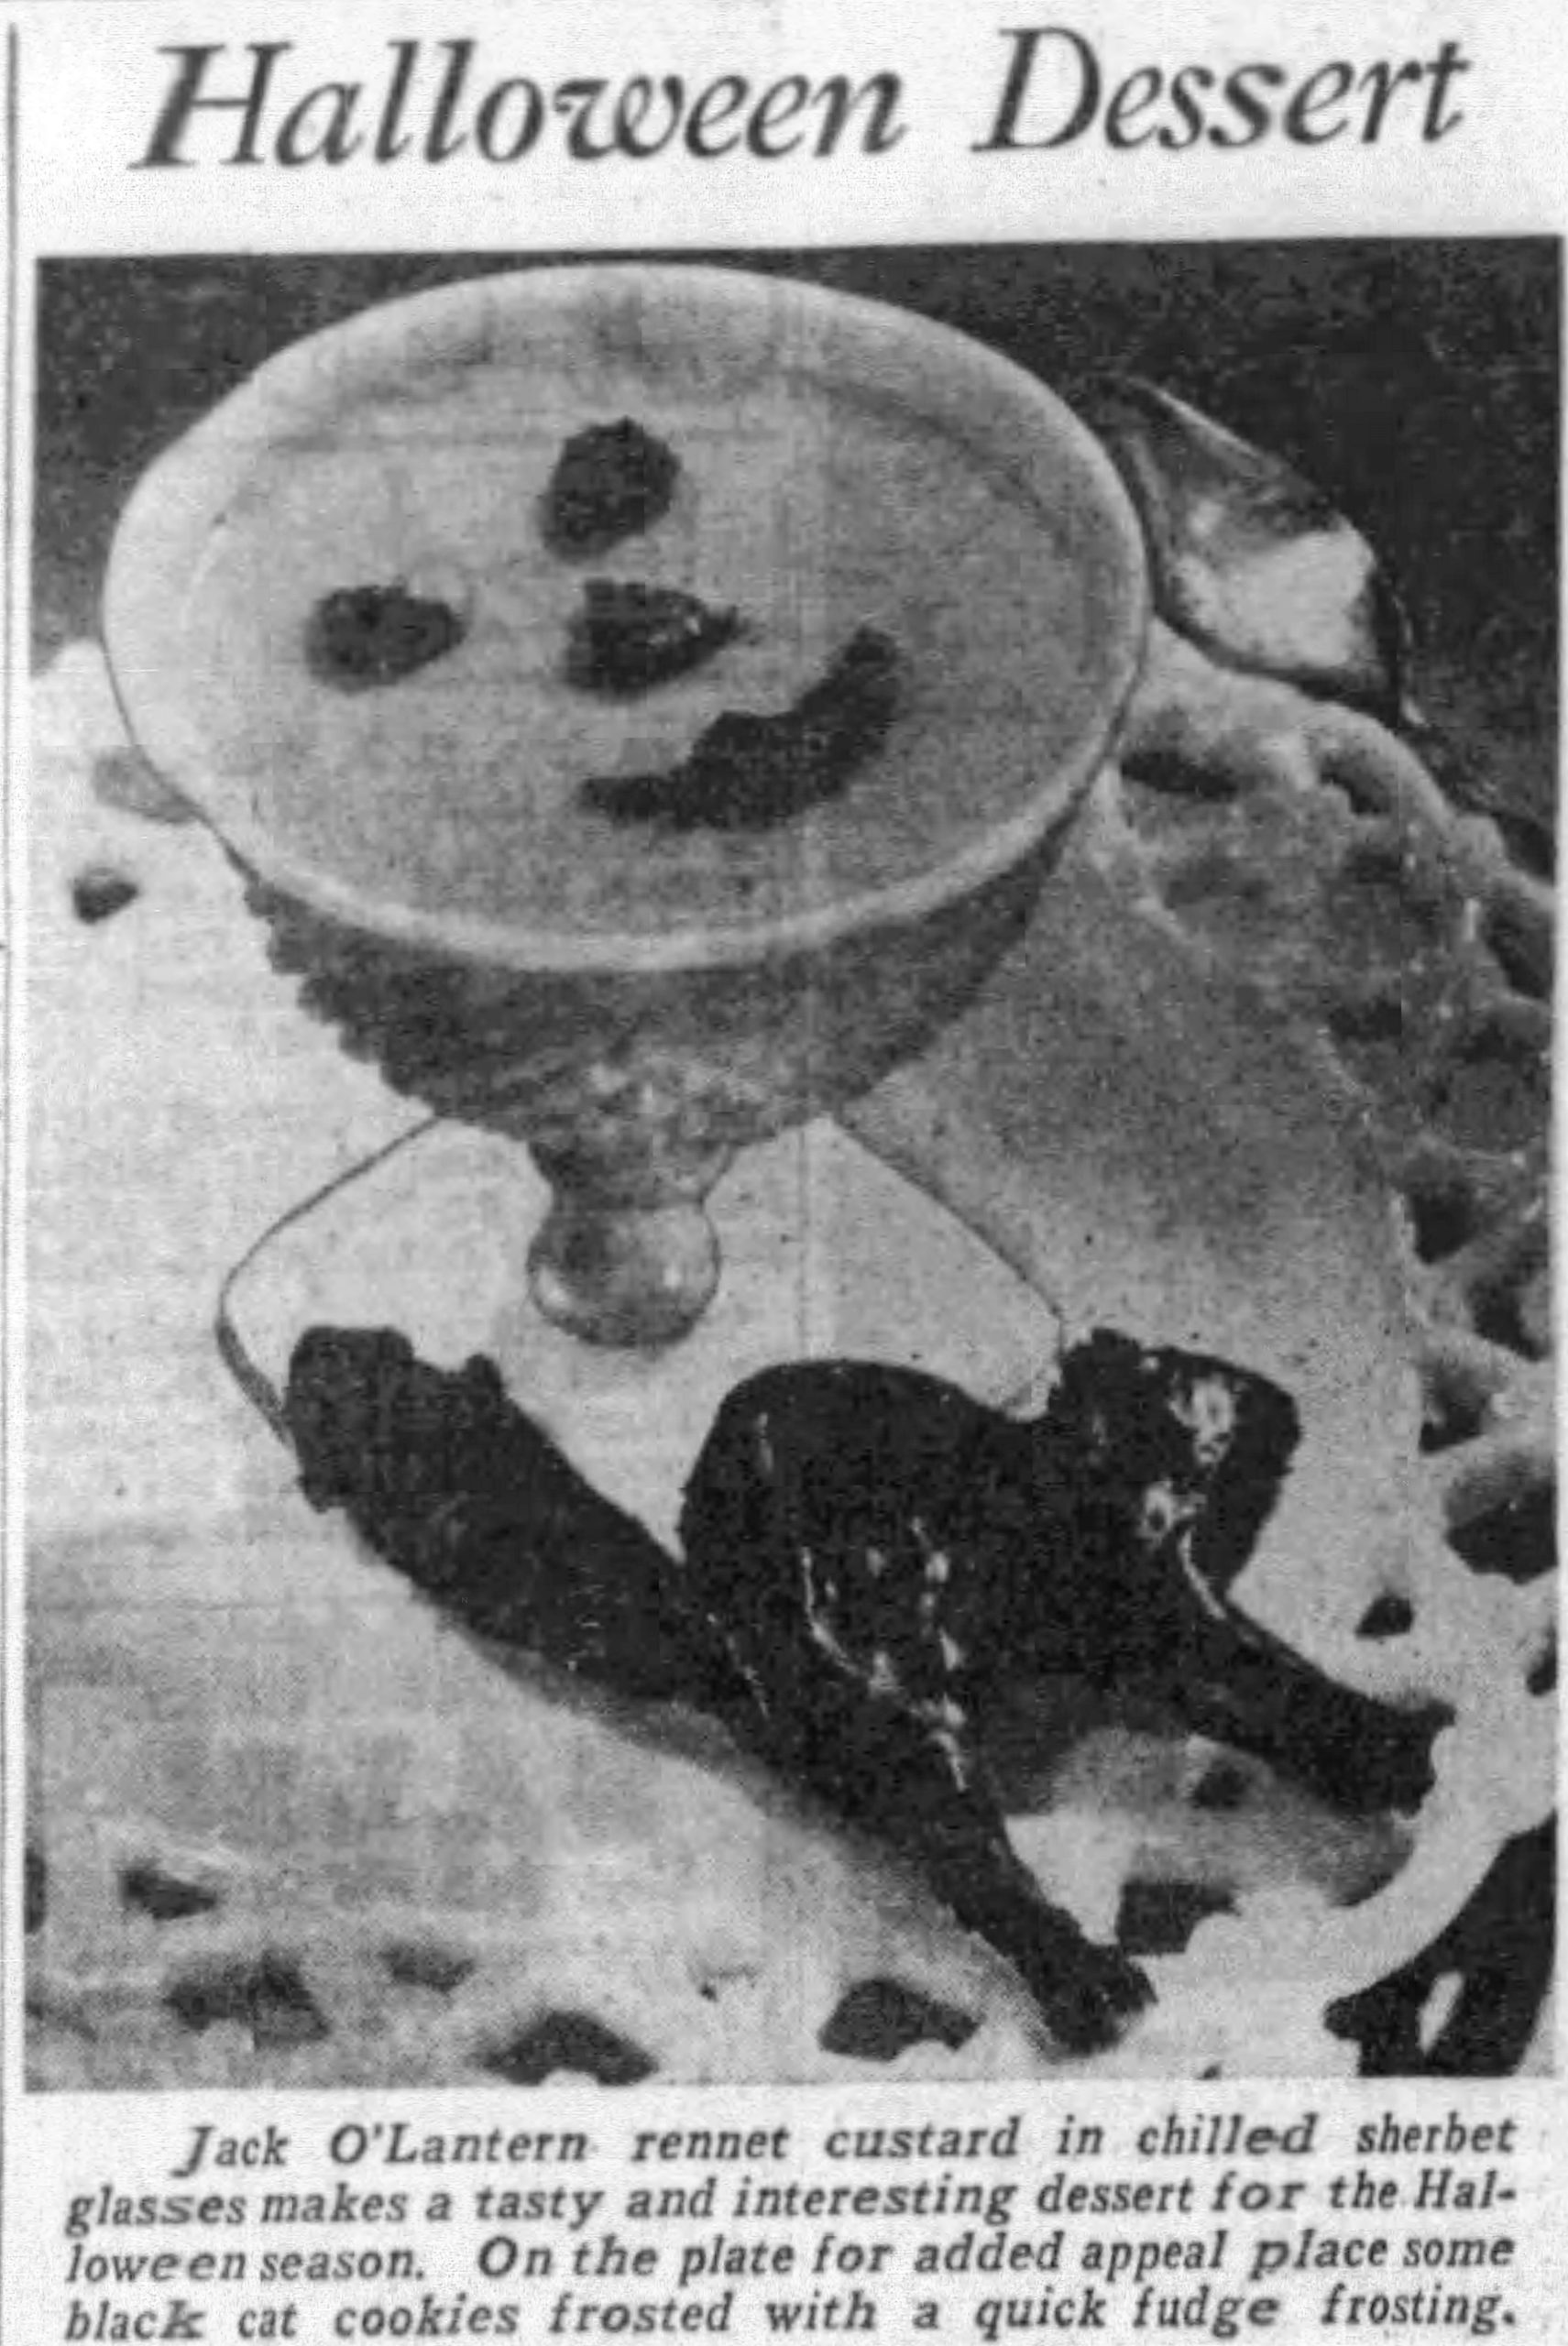 Prune pieces created the smiling Jack O’Lantern face on this orange rennet dessert, Pittsburgh Sun-Telegraph, October 30, 1942